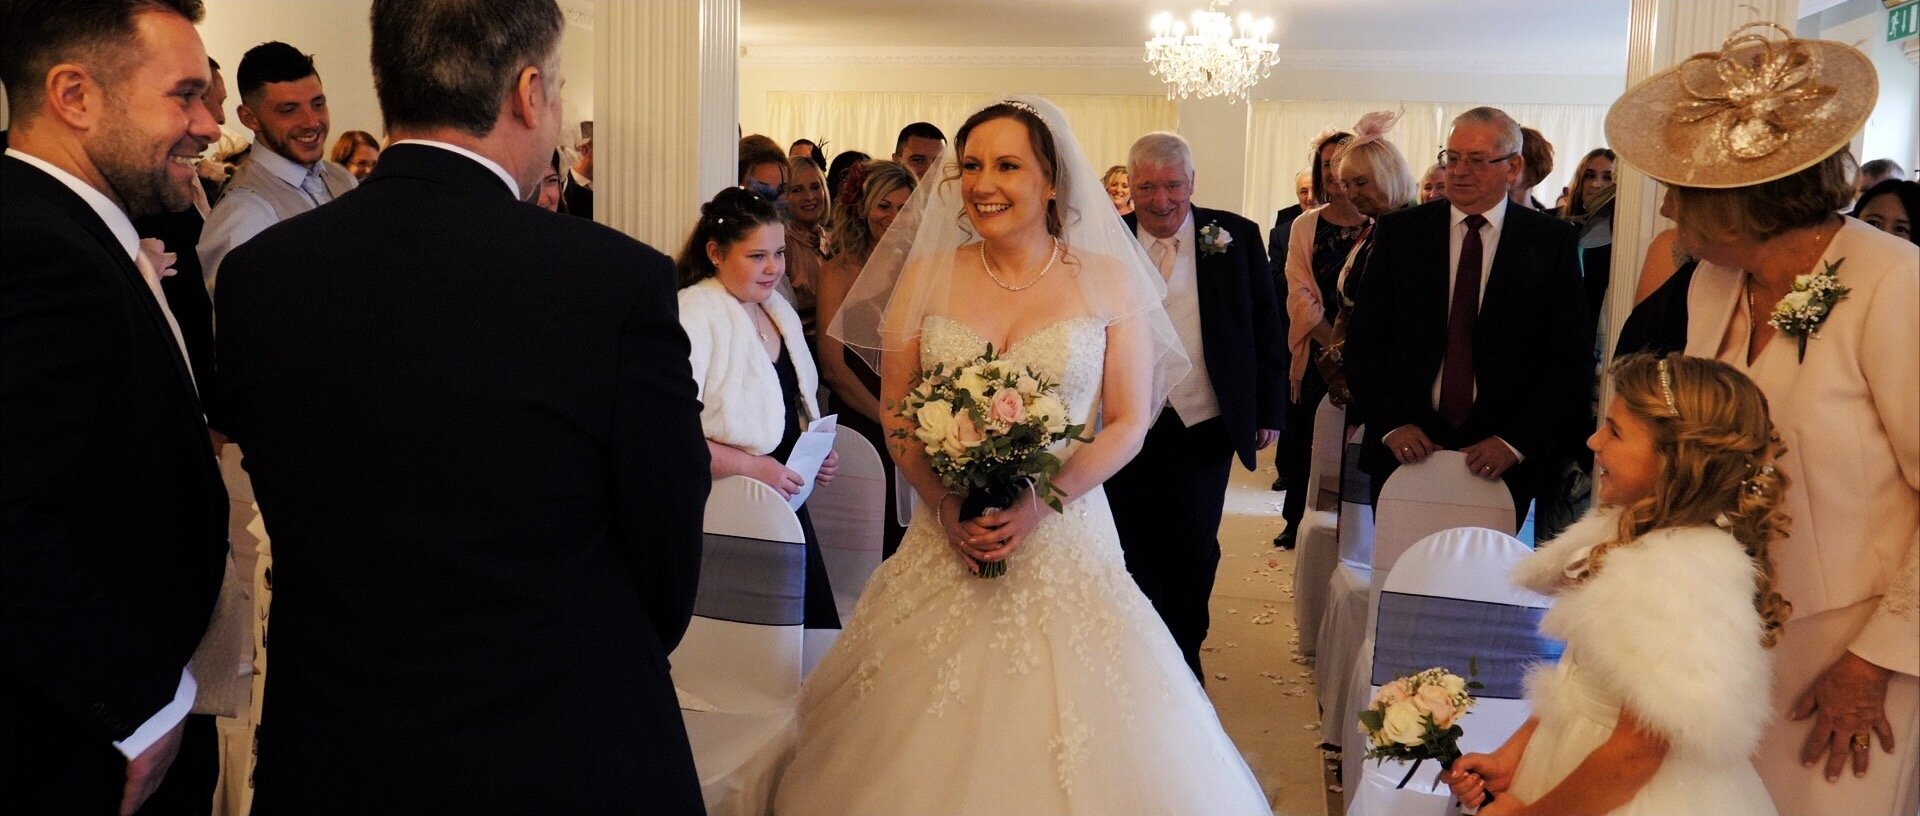 Walking the aisle at quendon hall essex.jpg